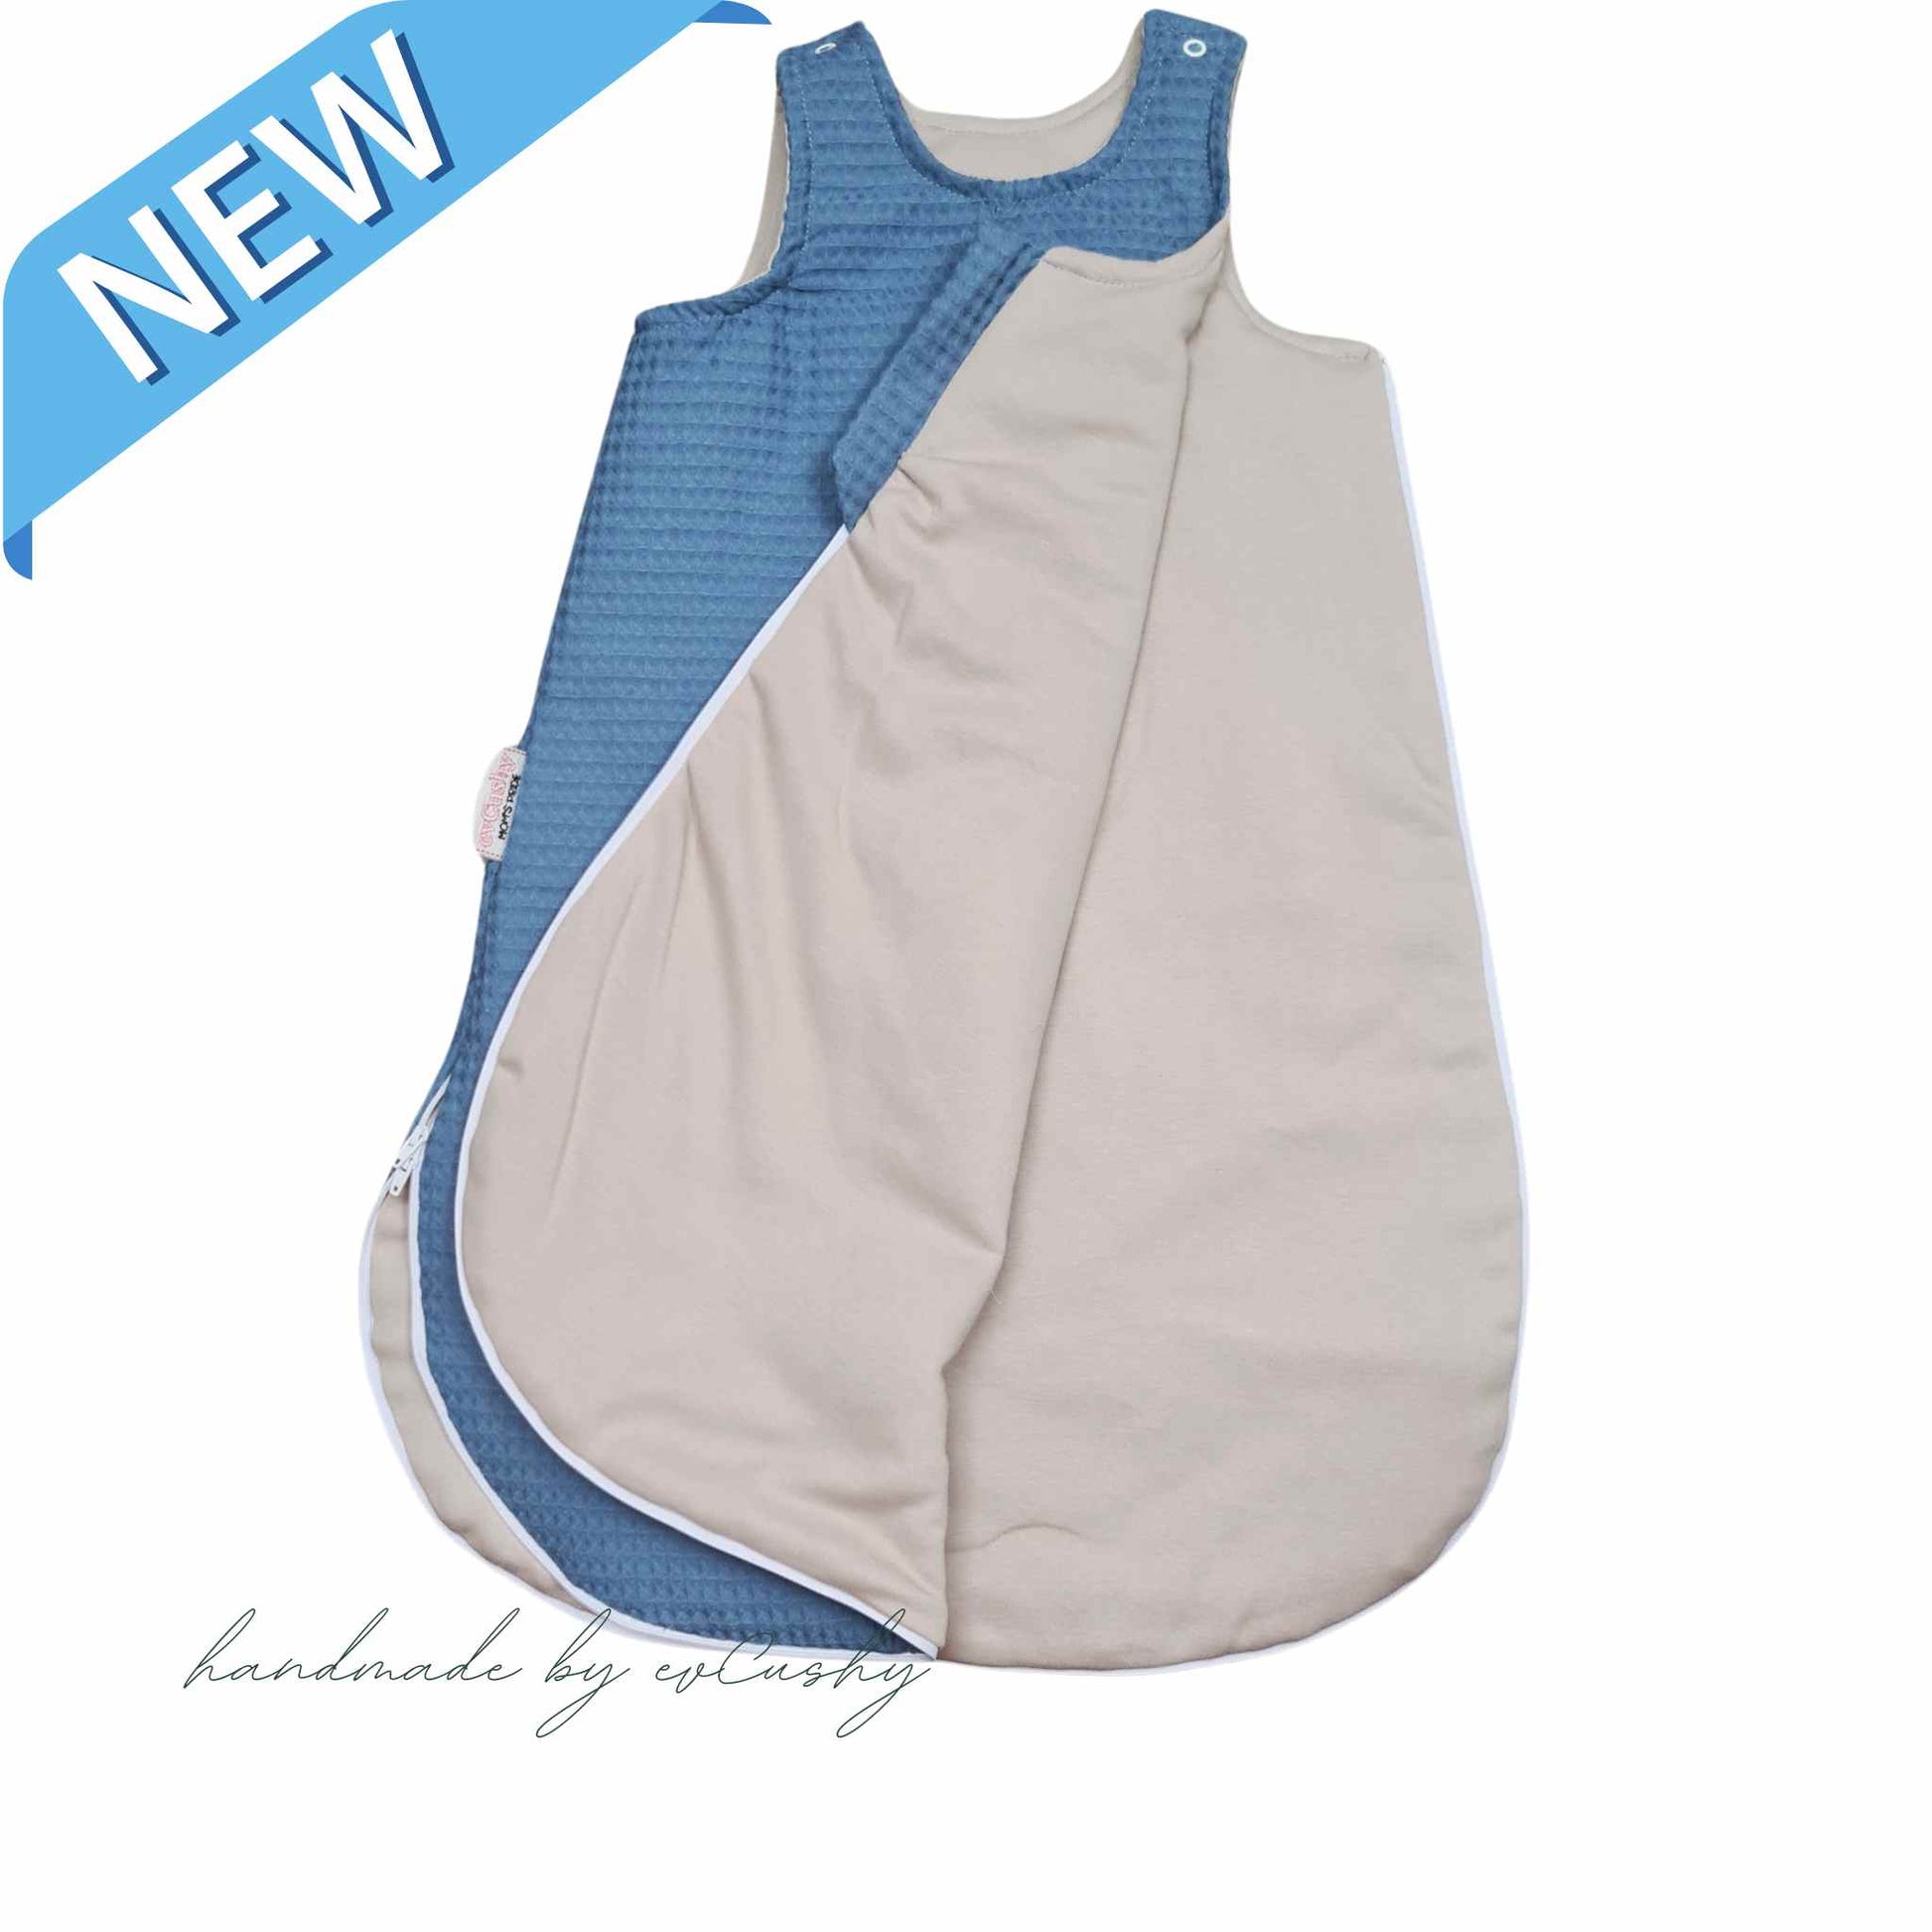 plain sleeping bag for baby jeans blue with beige lining 100% cotton 0-6 months in Ireland